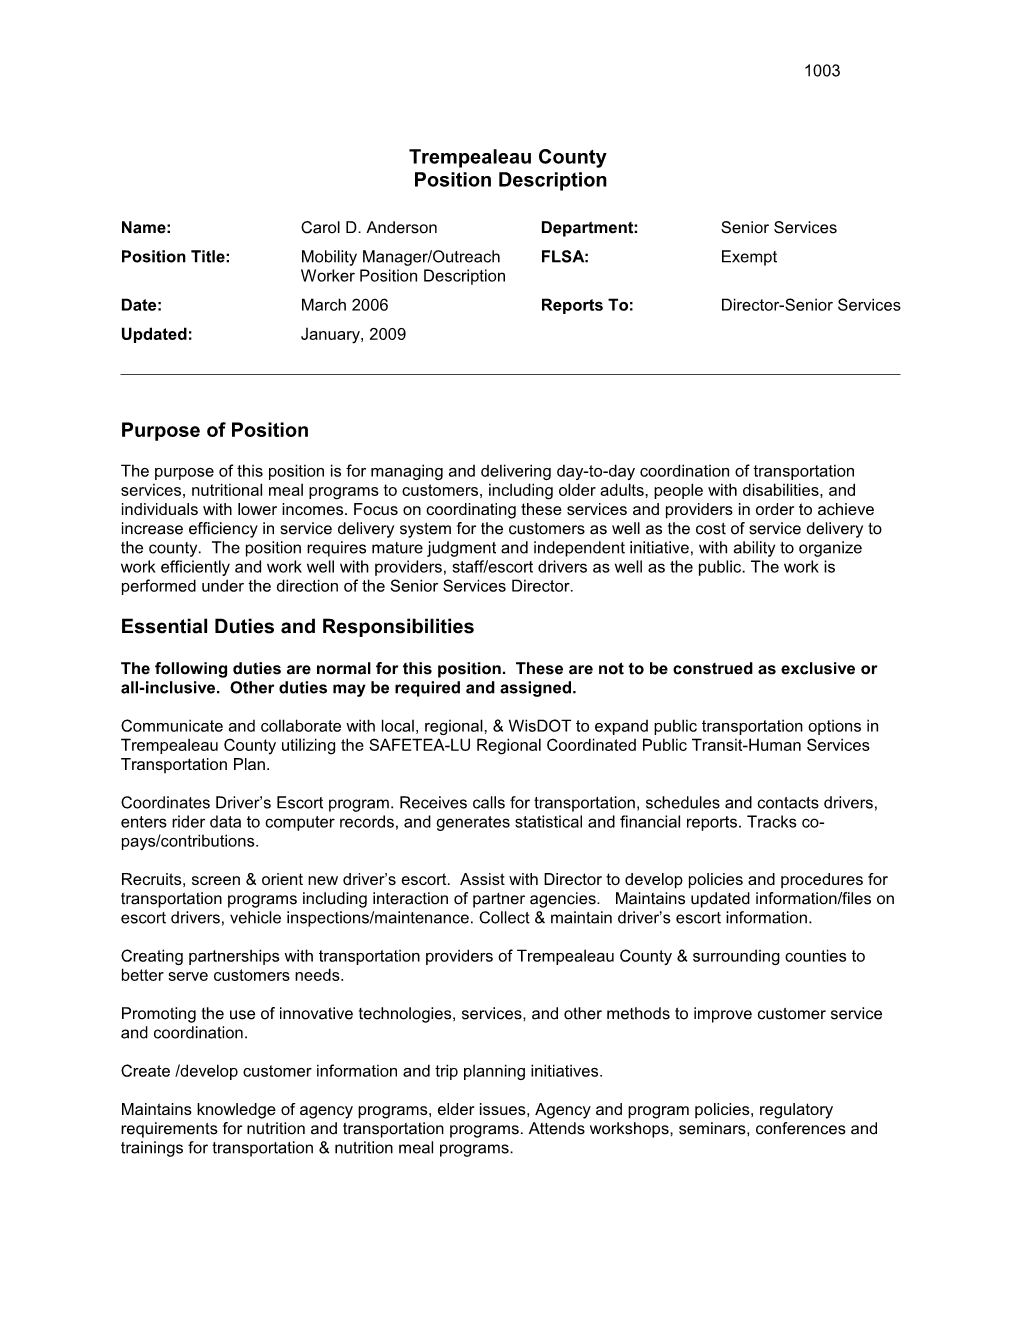 Mobility Manager/Outreach Worker Position Description 1003